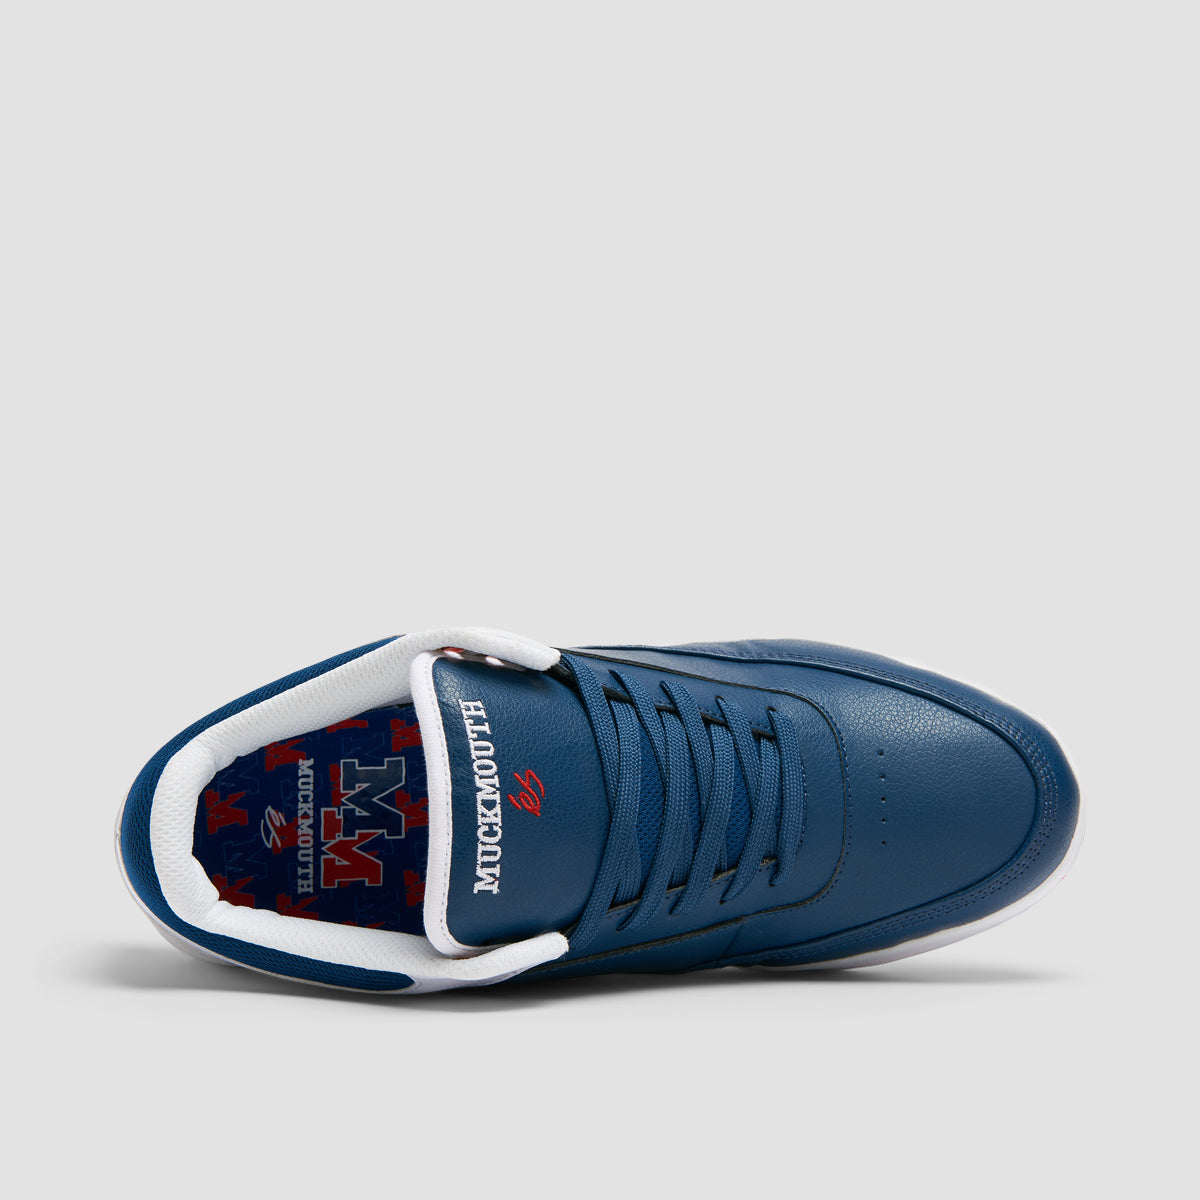 eS Stylus Mid X Muckmouth Shoes - Blue/White